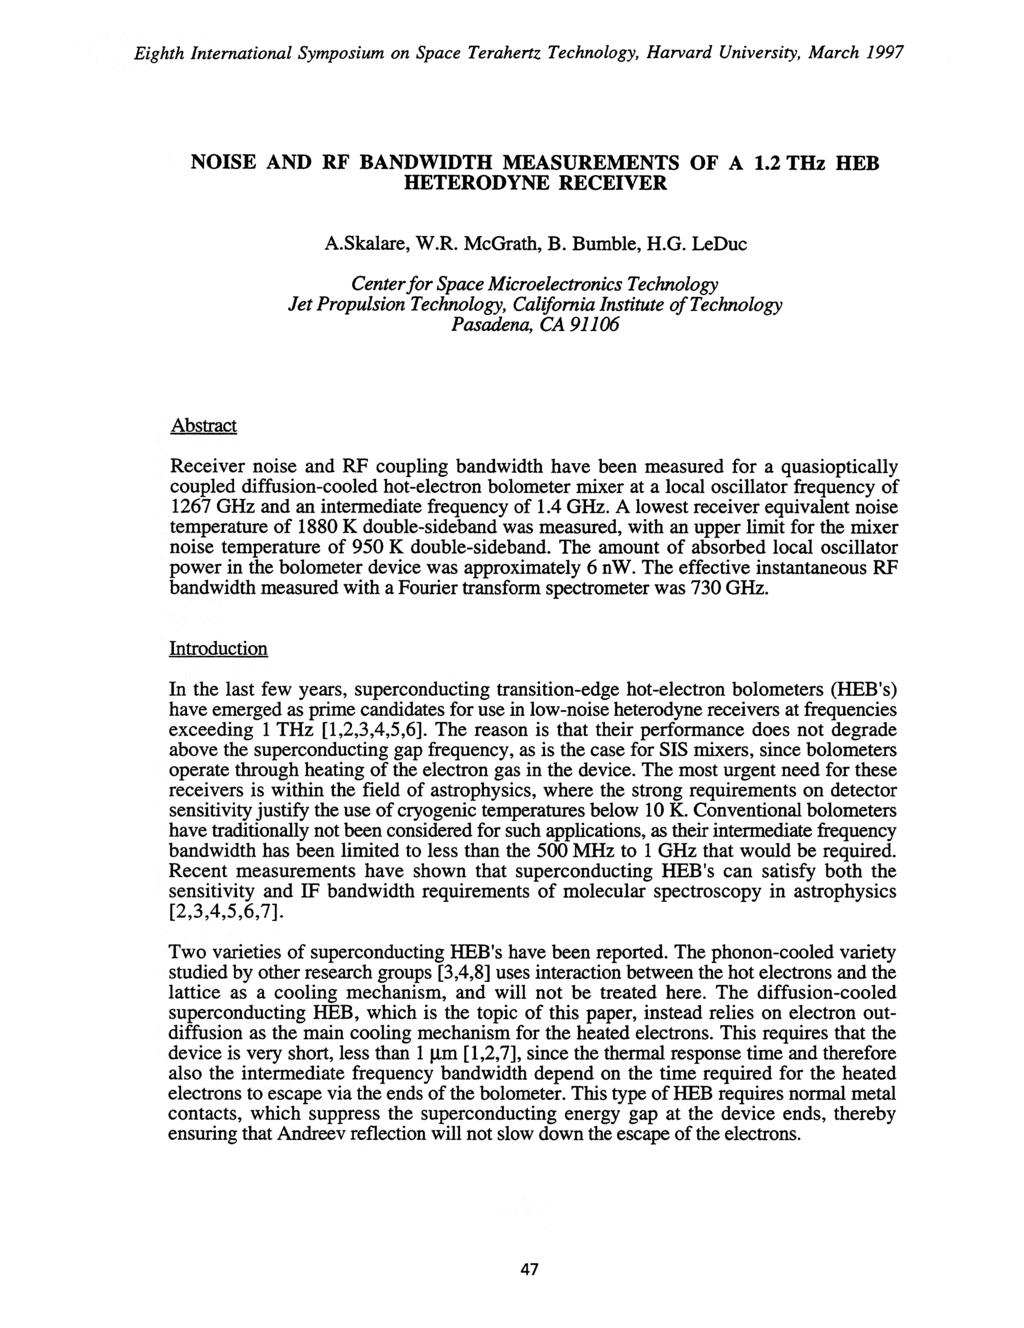 NOISE AND RF BANDWIDTH MEASUREMENTS OF A 1.2 THz HEB HETERODYNE RECEIVER A.Skalare, W.R. McGr